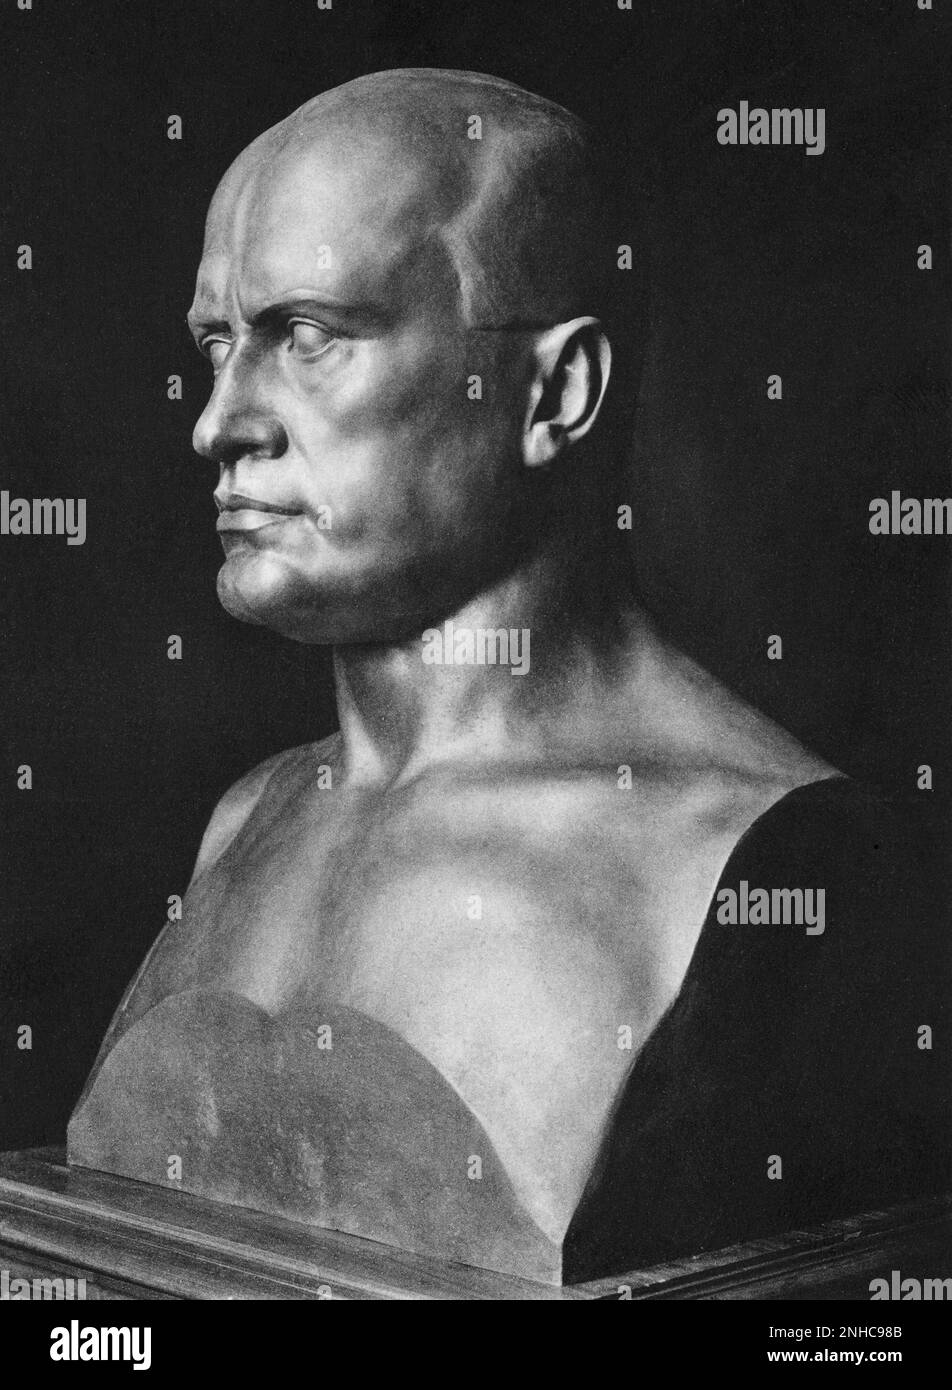 Benito mussolini statue Black and White Stock Photos & Images - Alamy